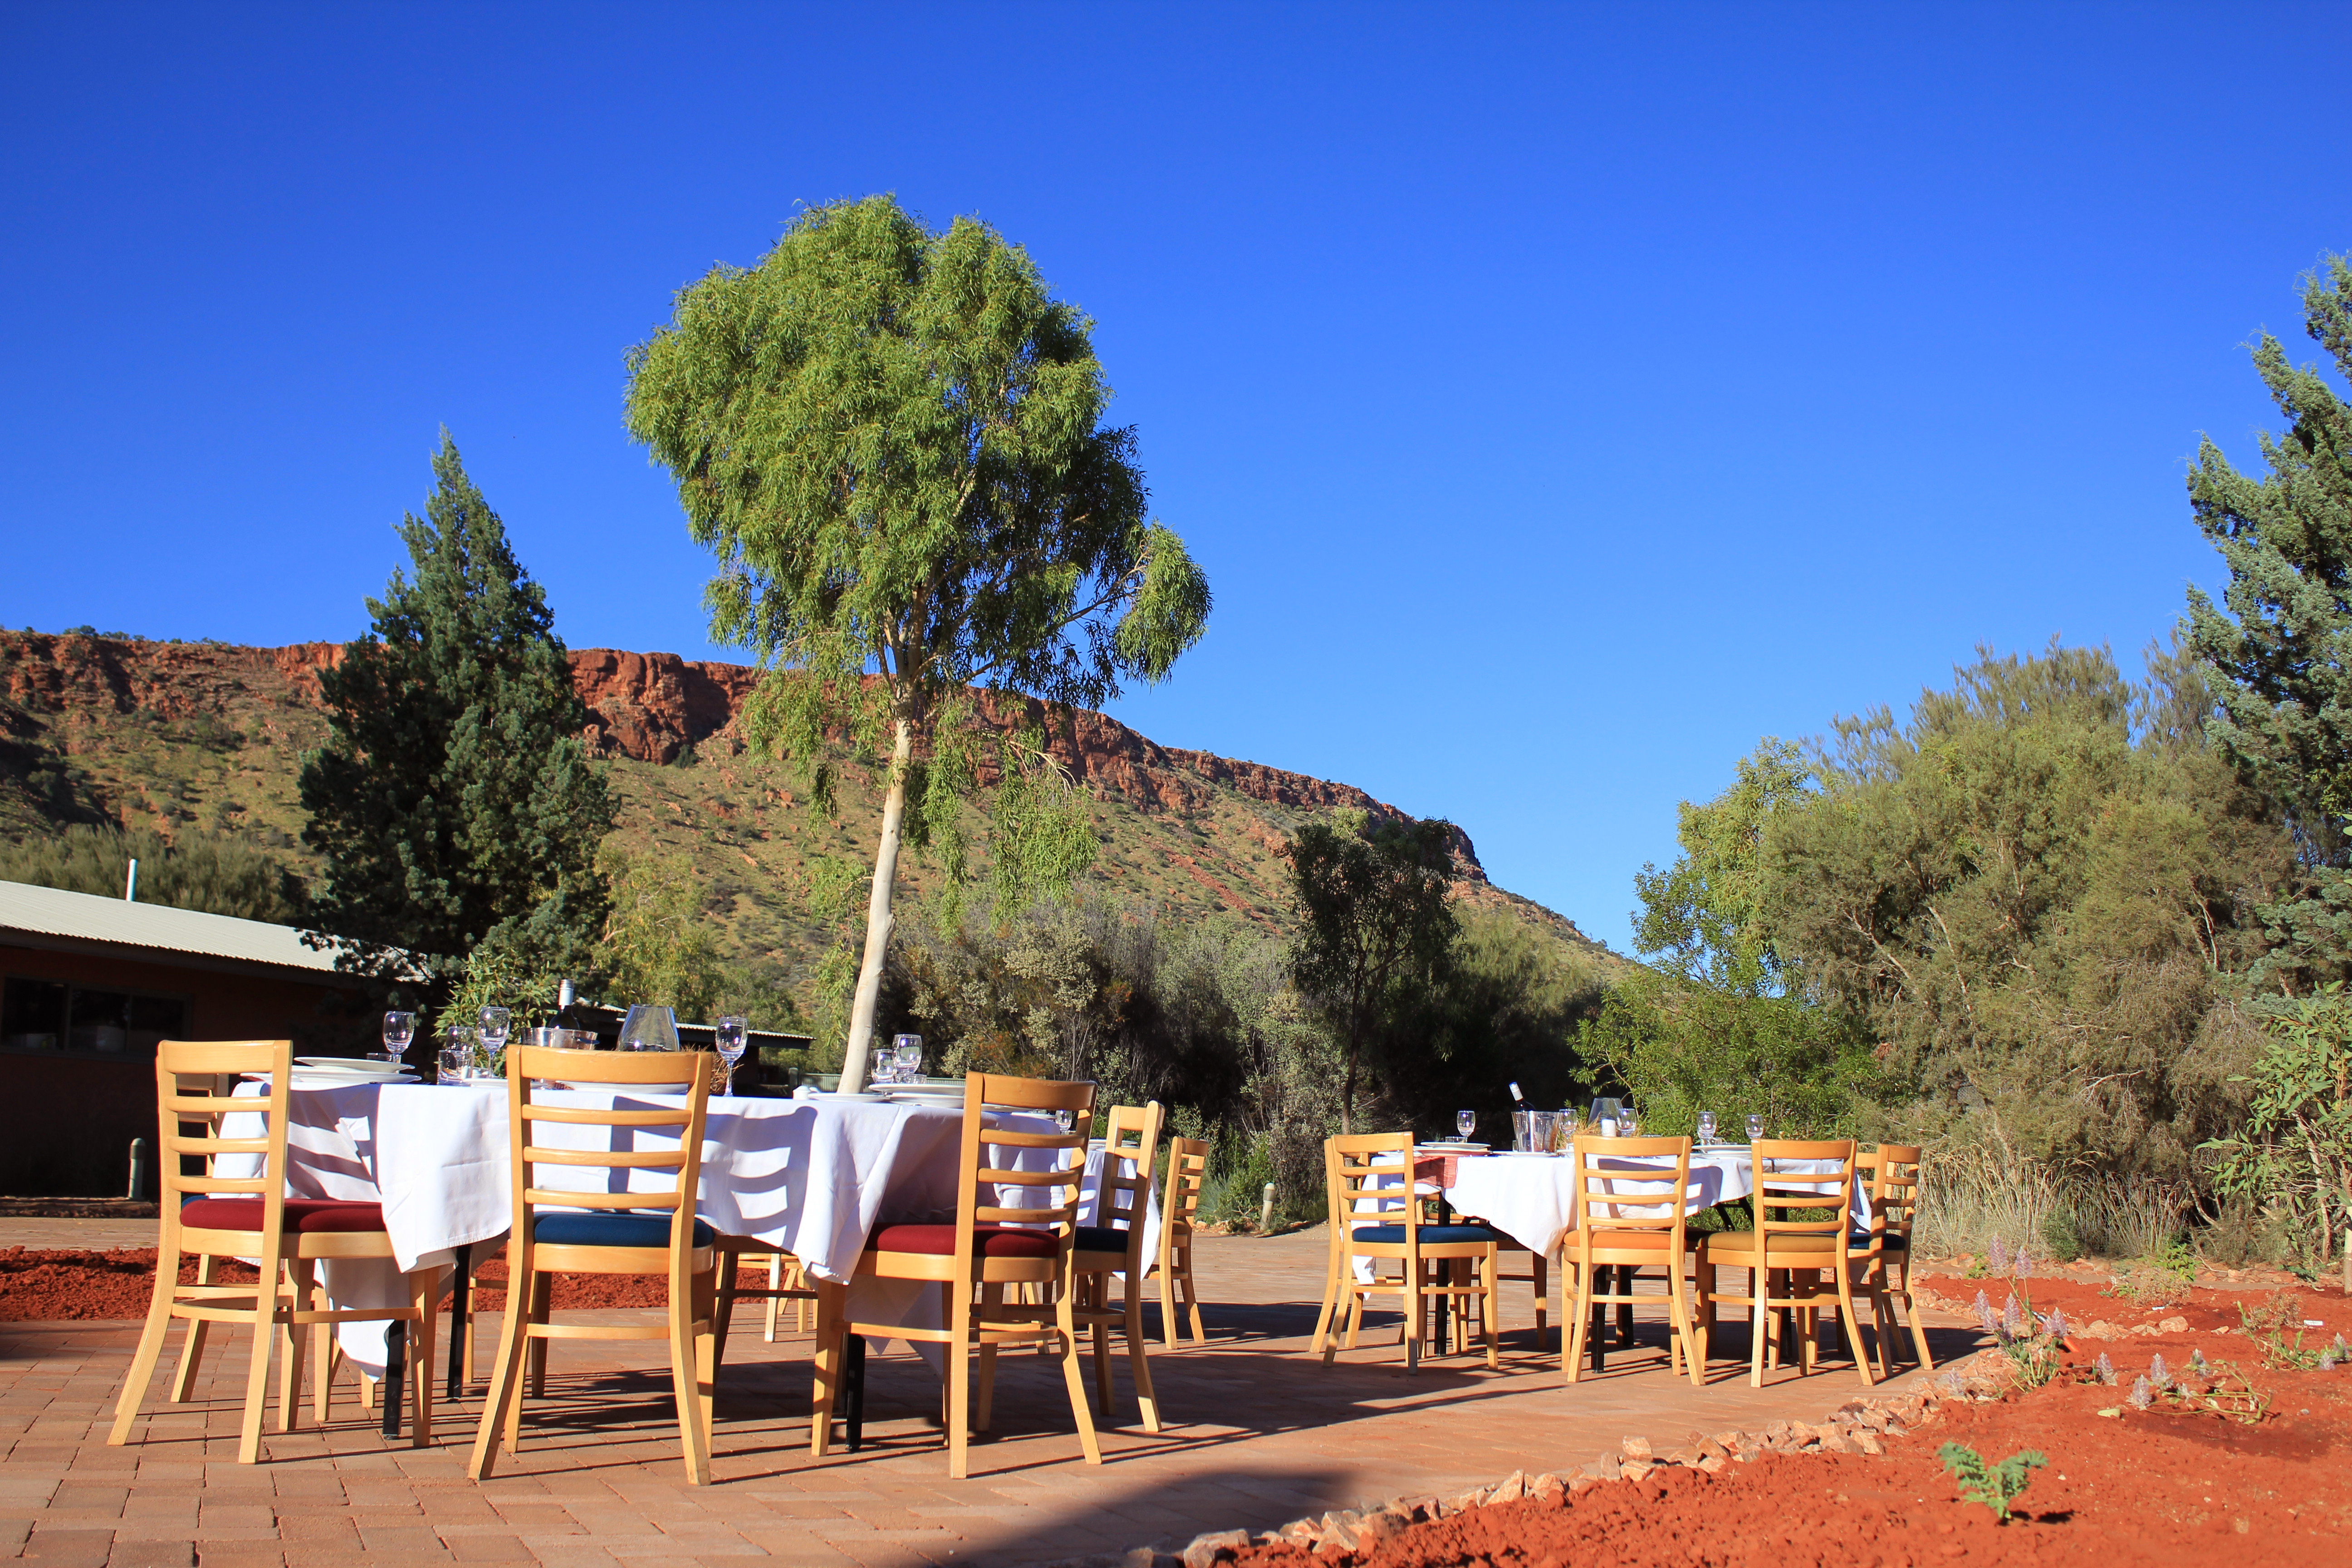 Round Tables With White Cloths Set For Dinner Event at Alice Springs Desert Park 